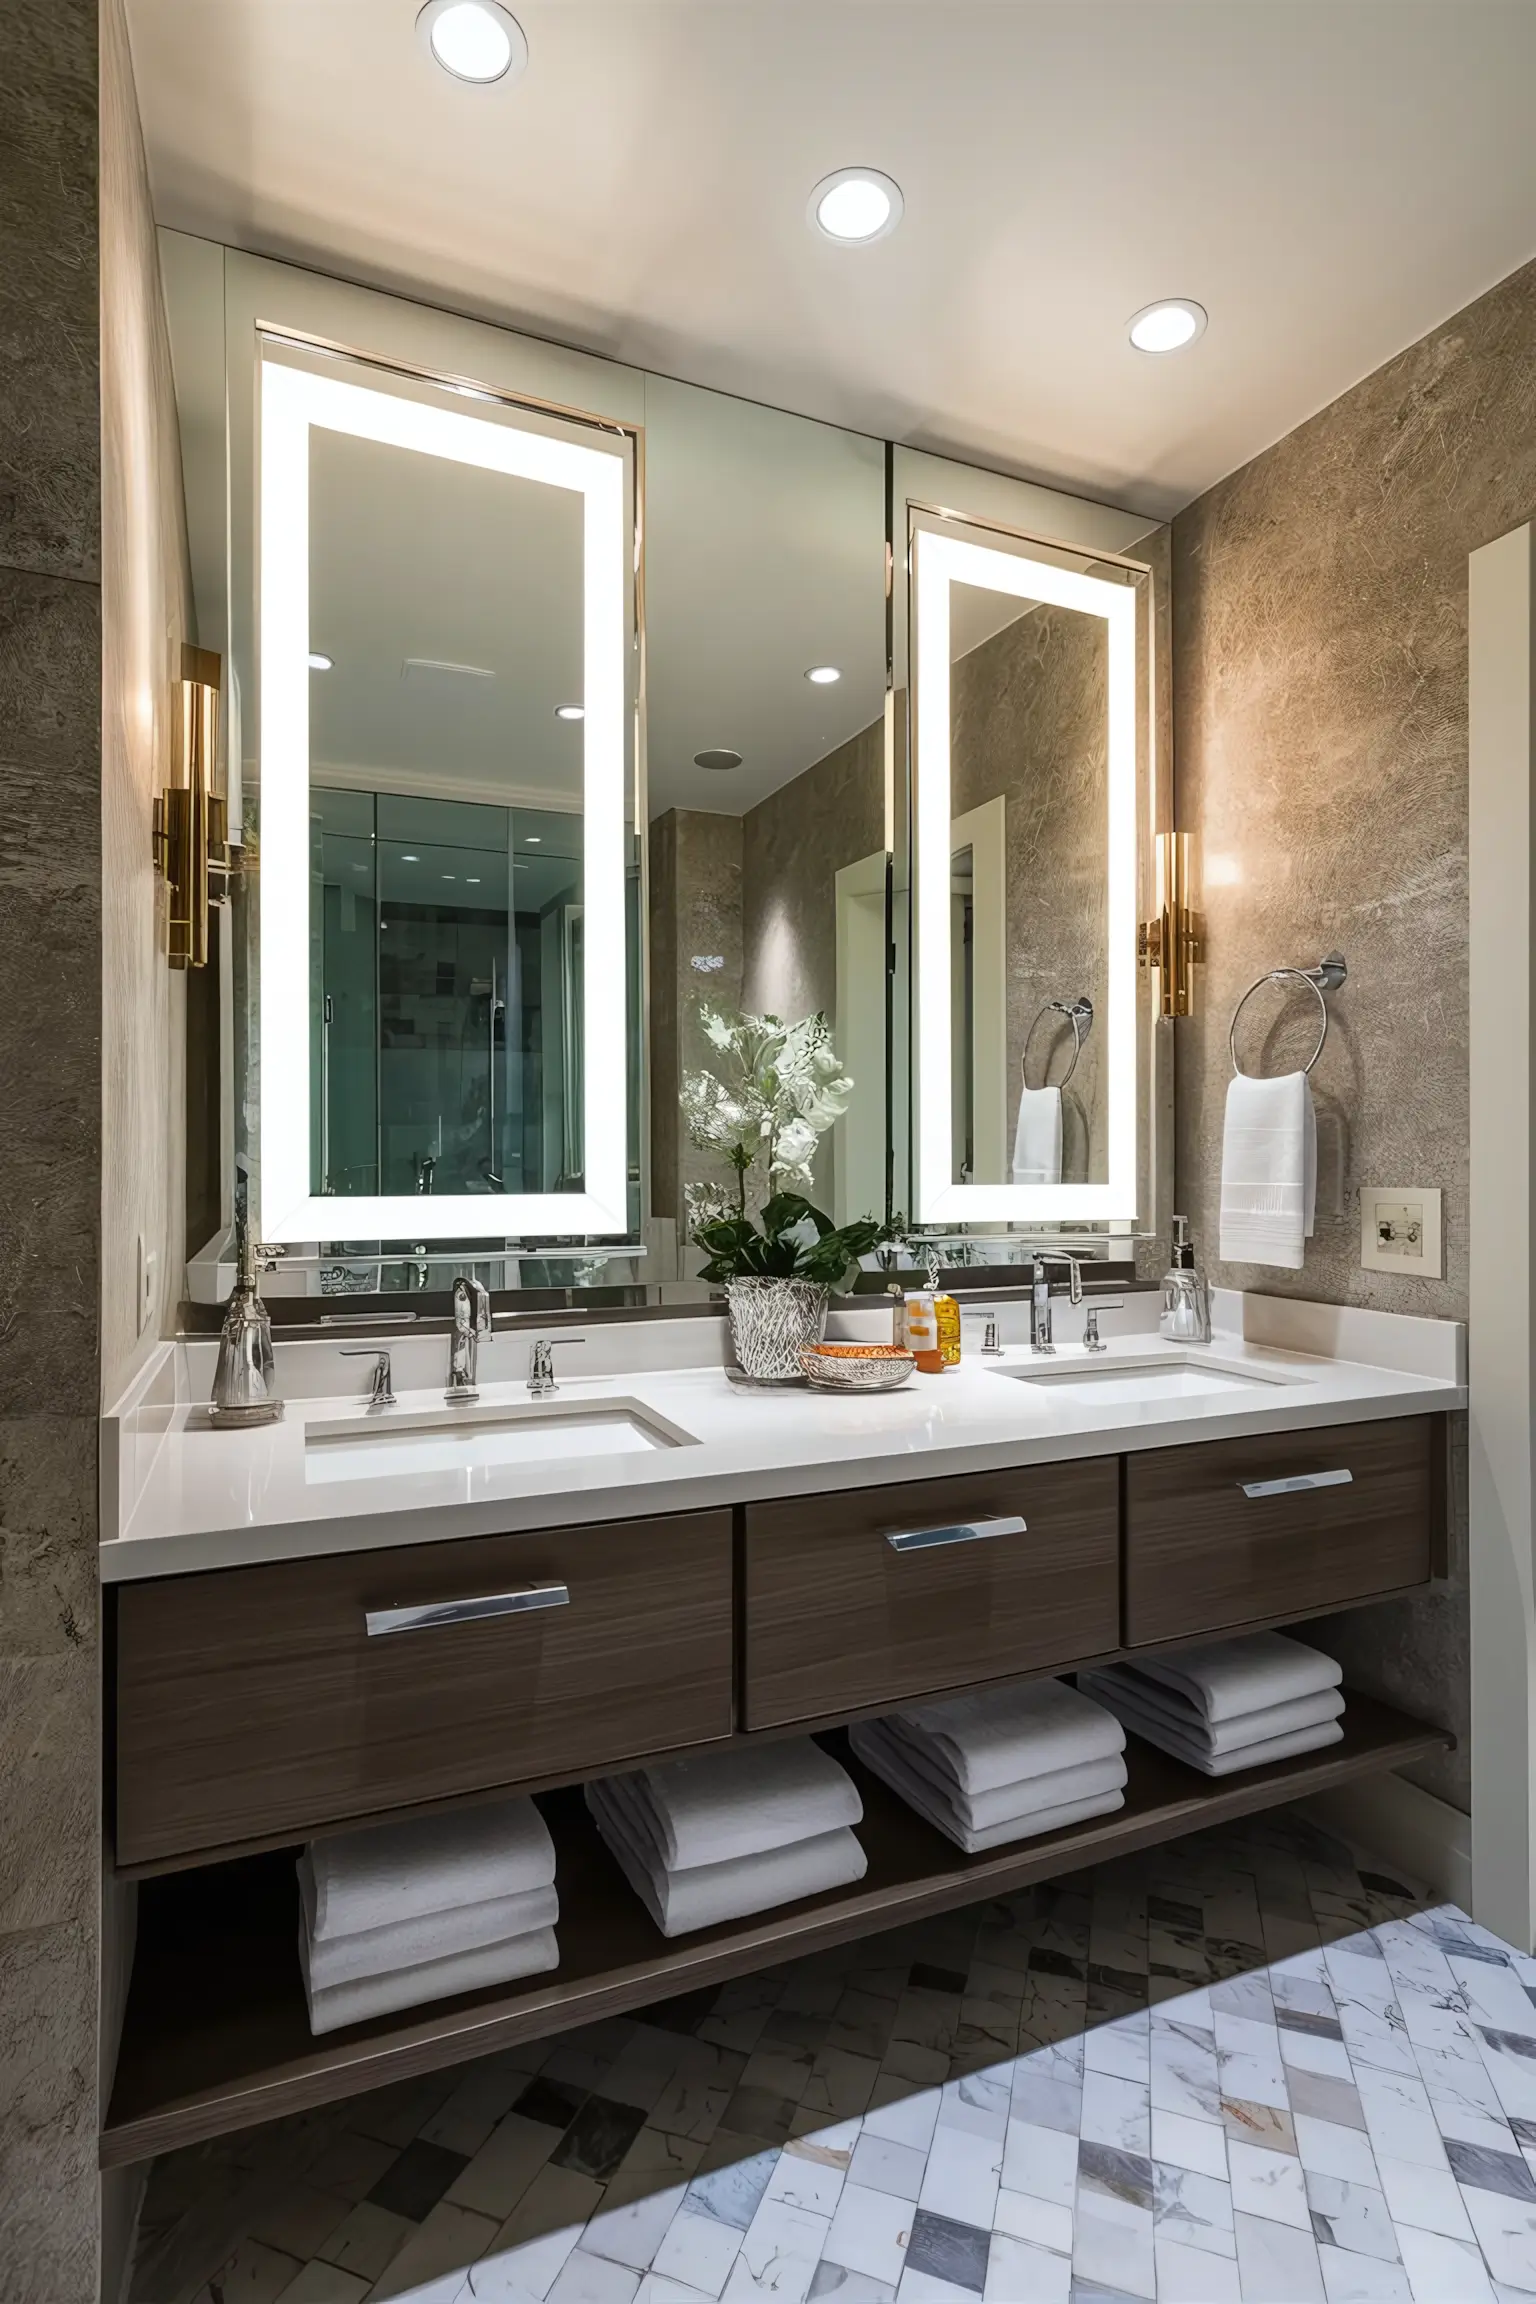 Modern bathroom vanity with chic, bright vanity lighting fixtures reflecting in a stylish mirror.